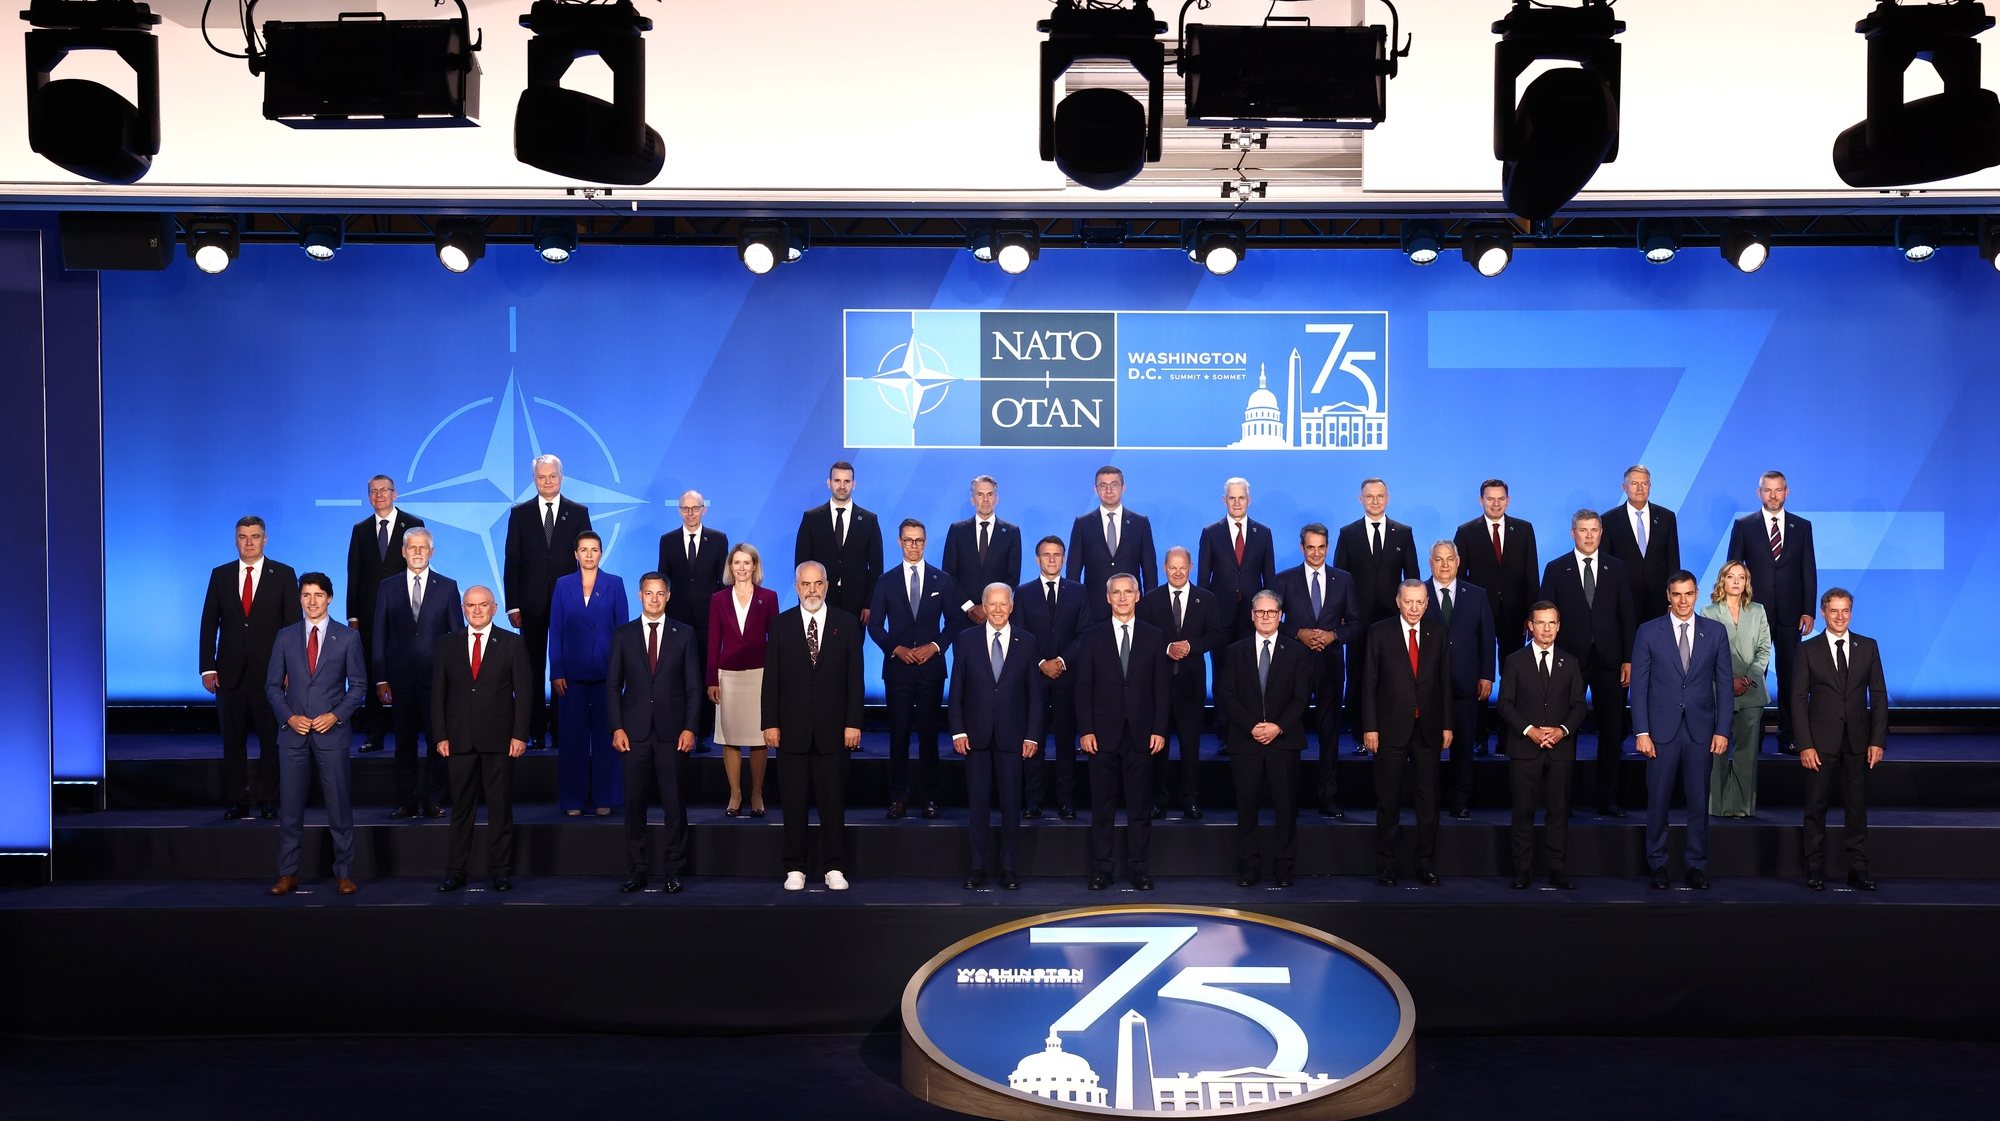 epa11470804 US President Joe Biden (C-L), NATO Secretary General Jens Stoltenberg (C-R) and leaders from NATO member countries pose for a family photo during the welcome ceremony for NATO’s 2024 annual meeting in Washington, DC, USA 10 July 2024. The 75th Anniversary NATO Summit is taking place in Washington, DC, from 09 to 11 July 2024 and NATO members are using the gathering as an opportunity to project their ongoing support for Ukraine as the country continues to fend off Russian aggression.  EPA/JIM LO SCALZO